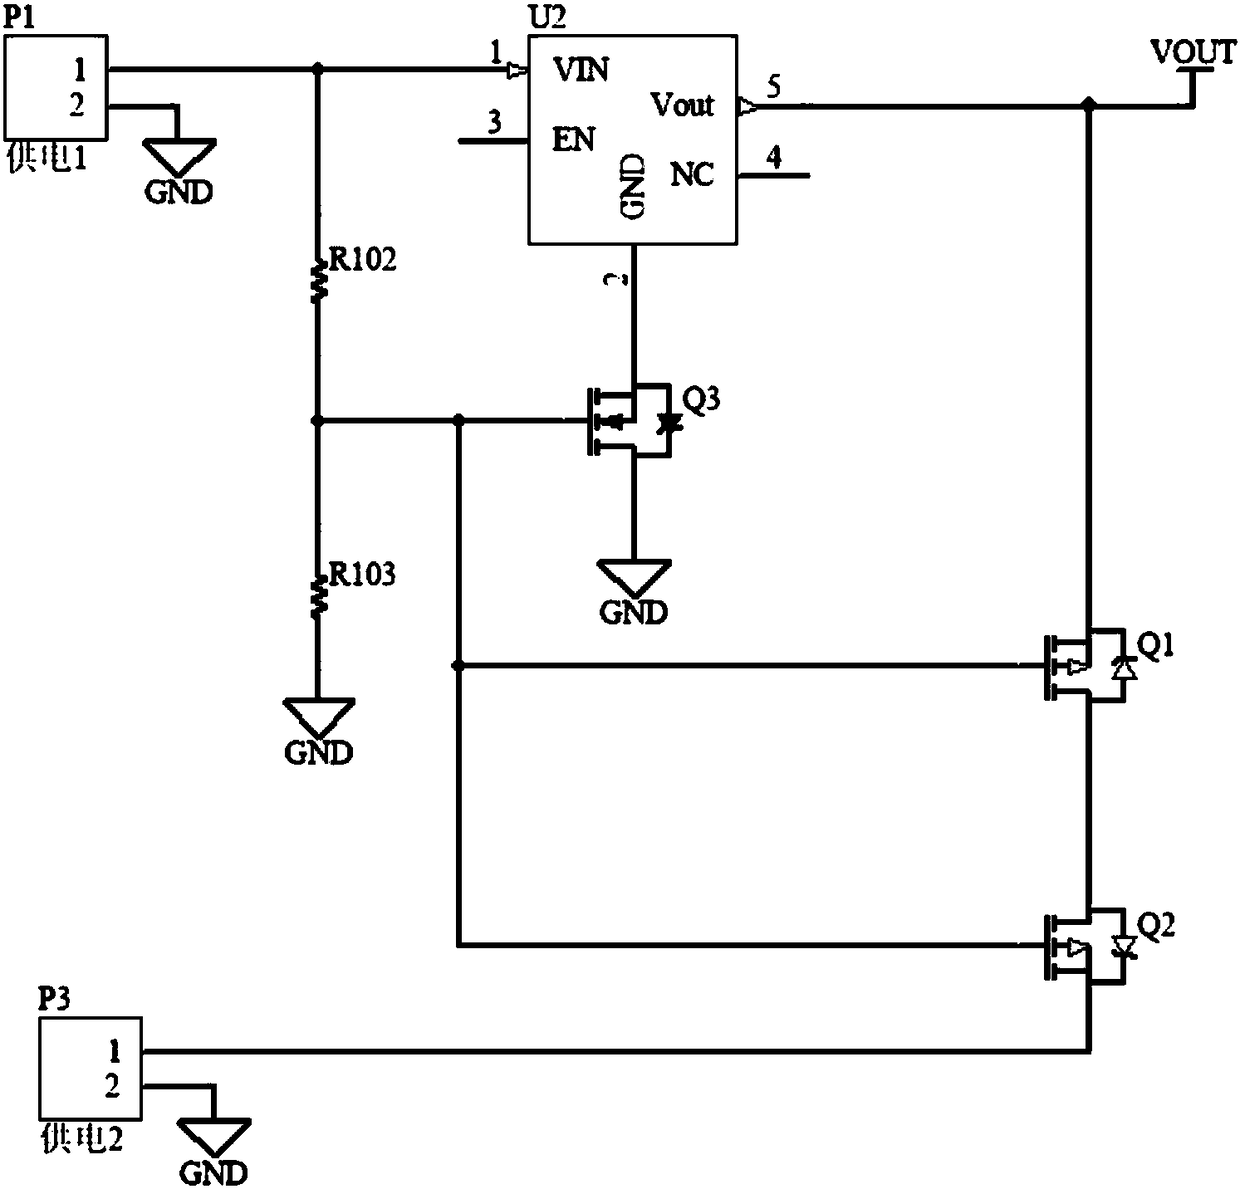 Circuit with functions of preventing backflow and conducting automatic switching over power supply to achieve voltage-loss-free output